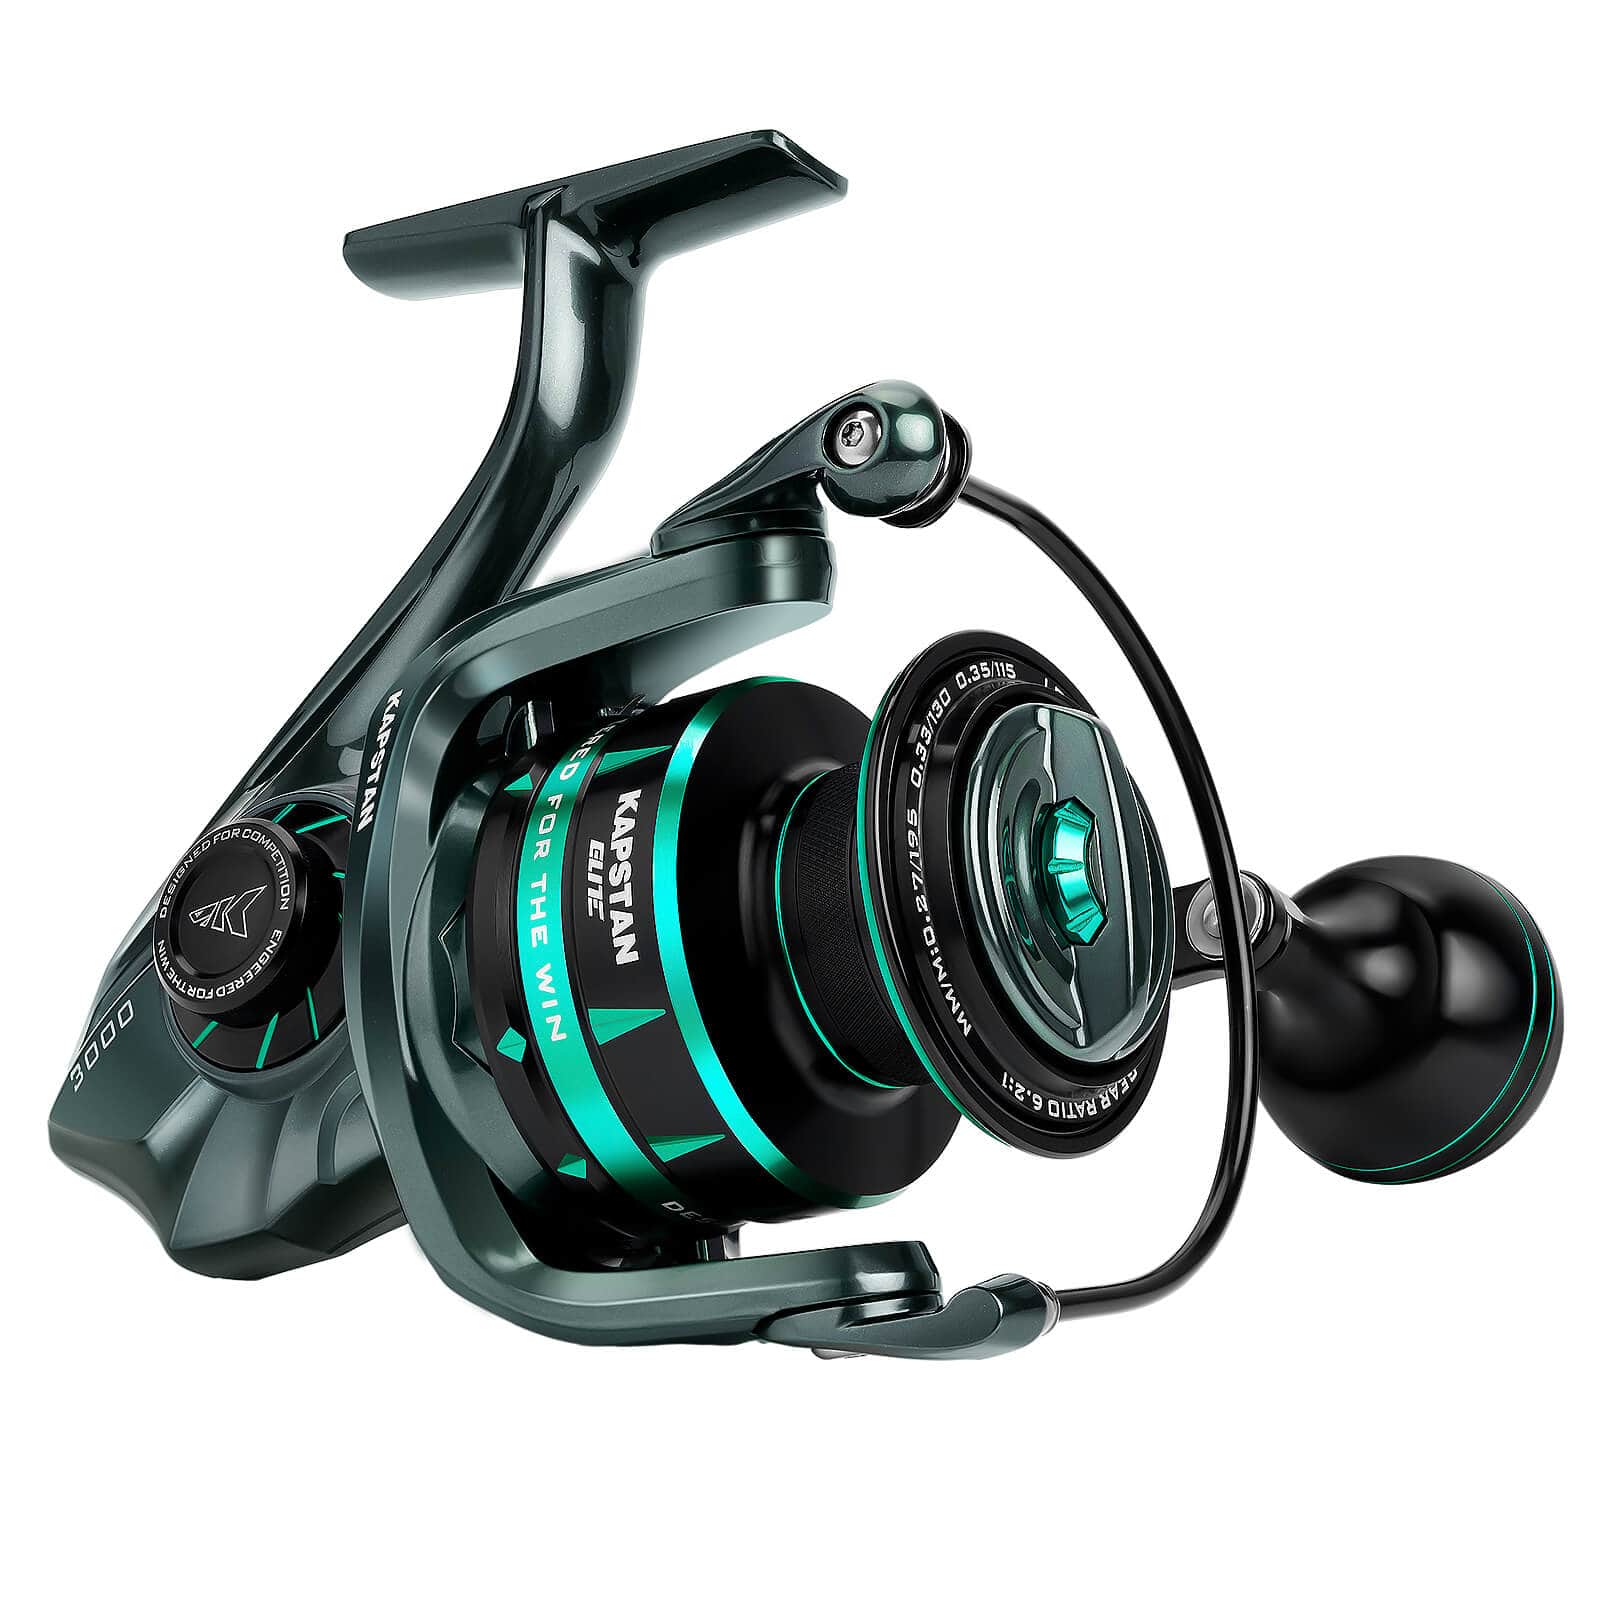 kastking fishing reel, kastking fishing reel Suppliers and Manufacturers at